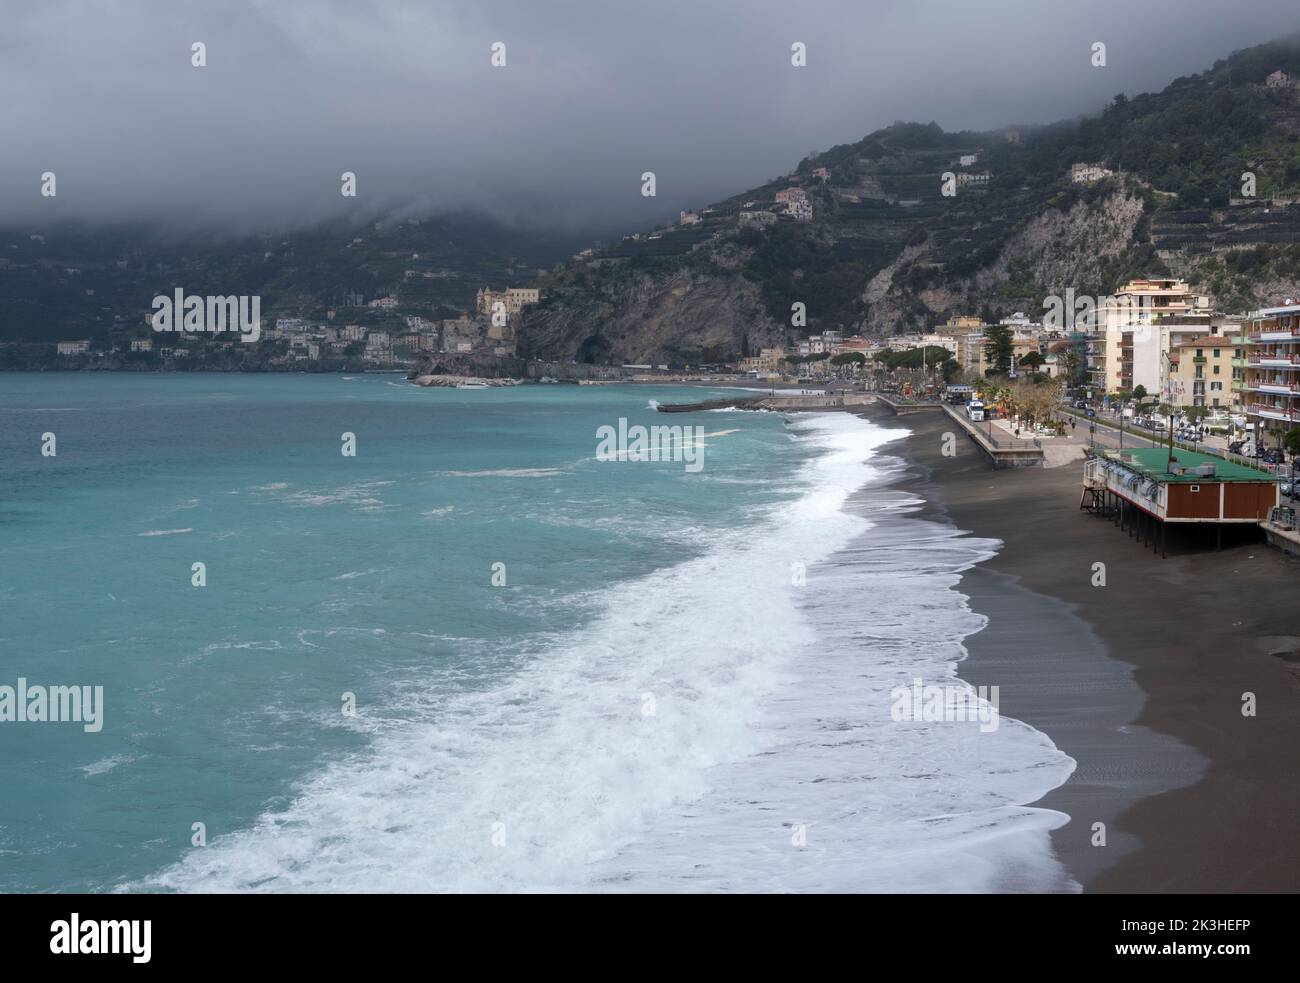 Overcast weather in the small coastal village of Italy Stock Photo